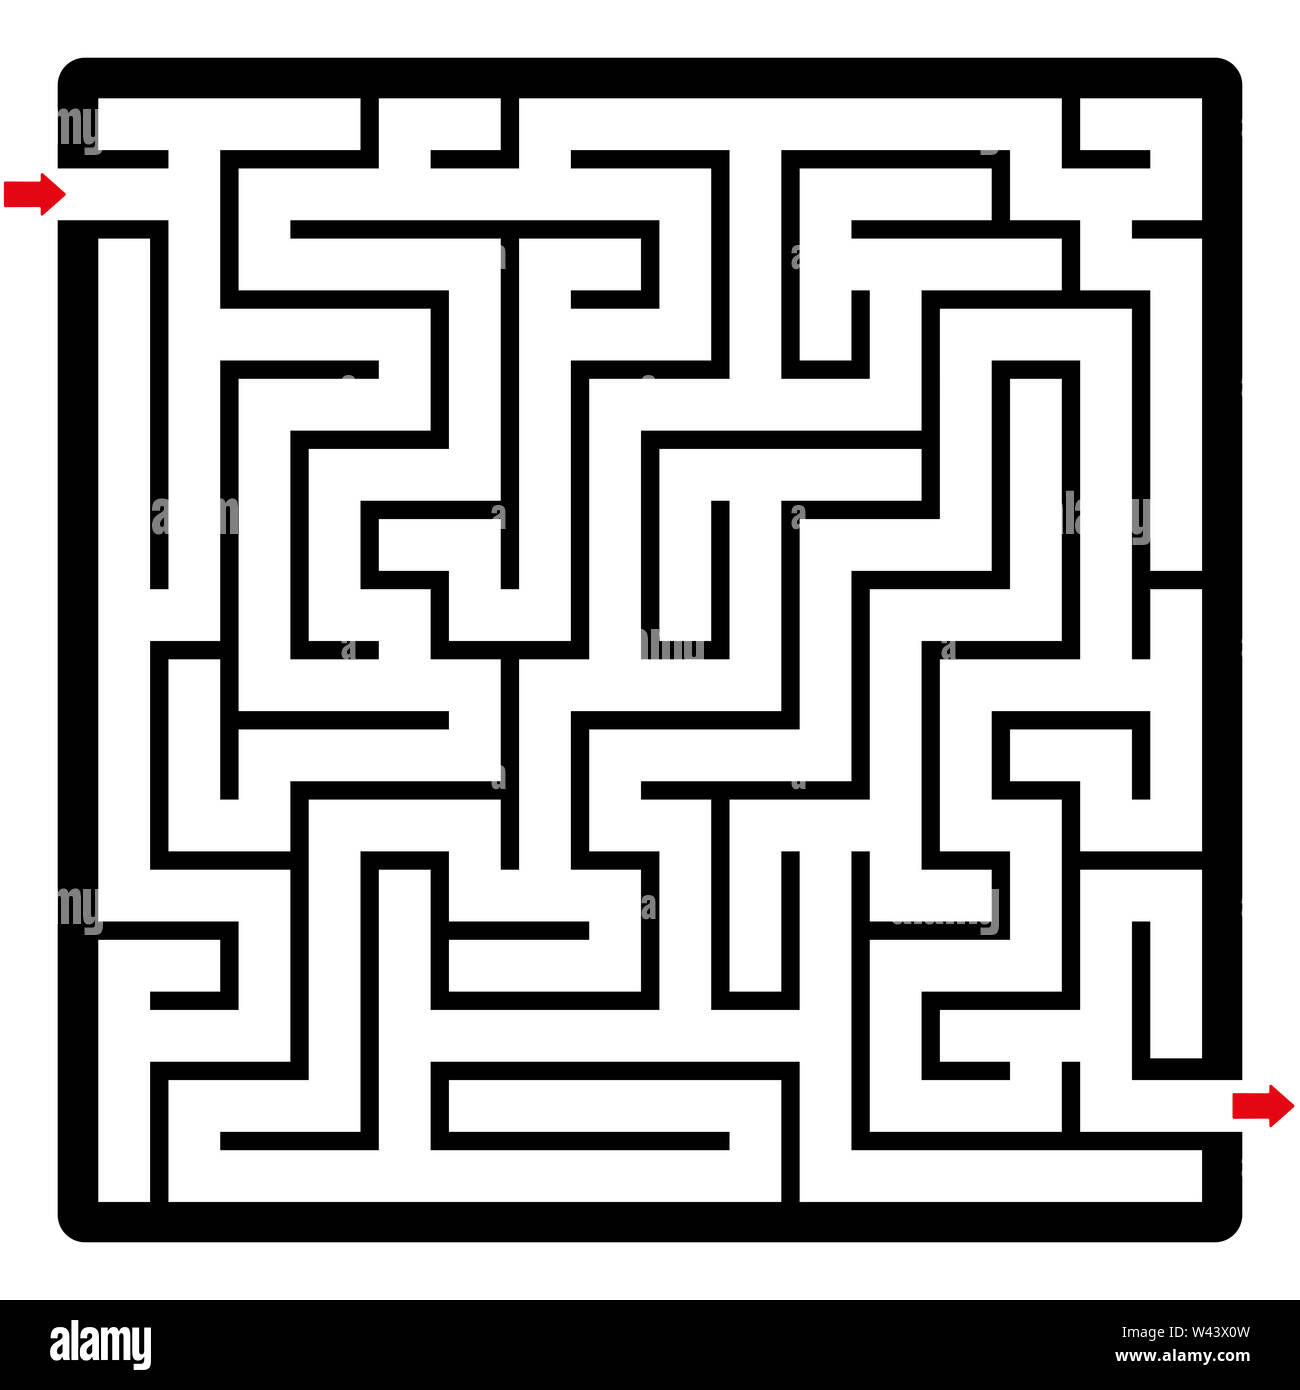 Maze, square format. Labyrinth with two arrows. Fun game to reach the goal. Stock Photo